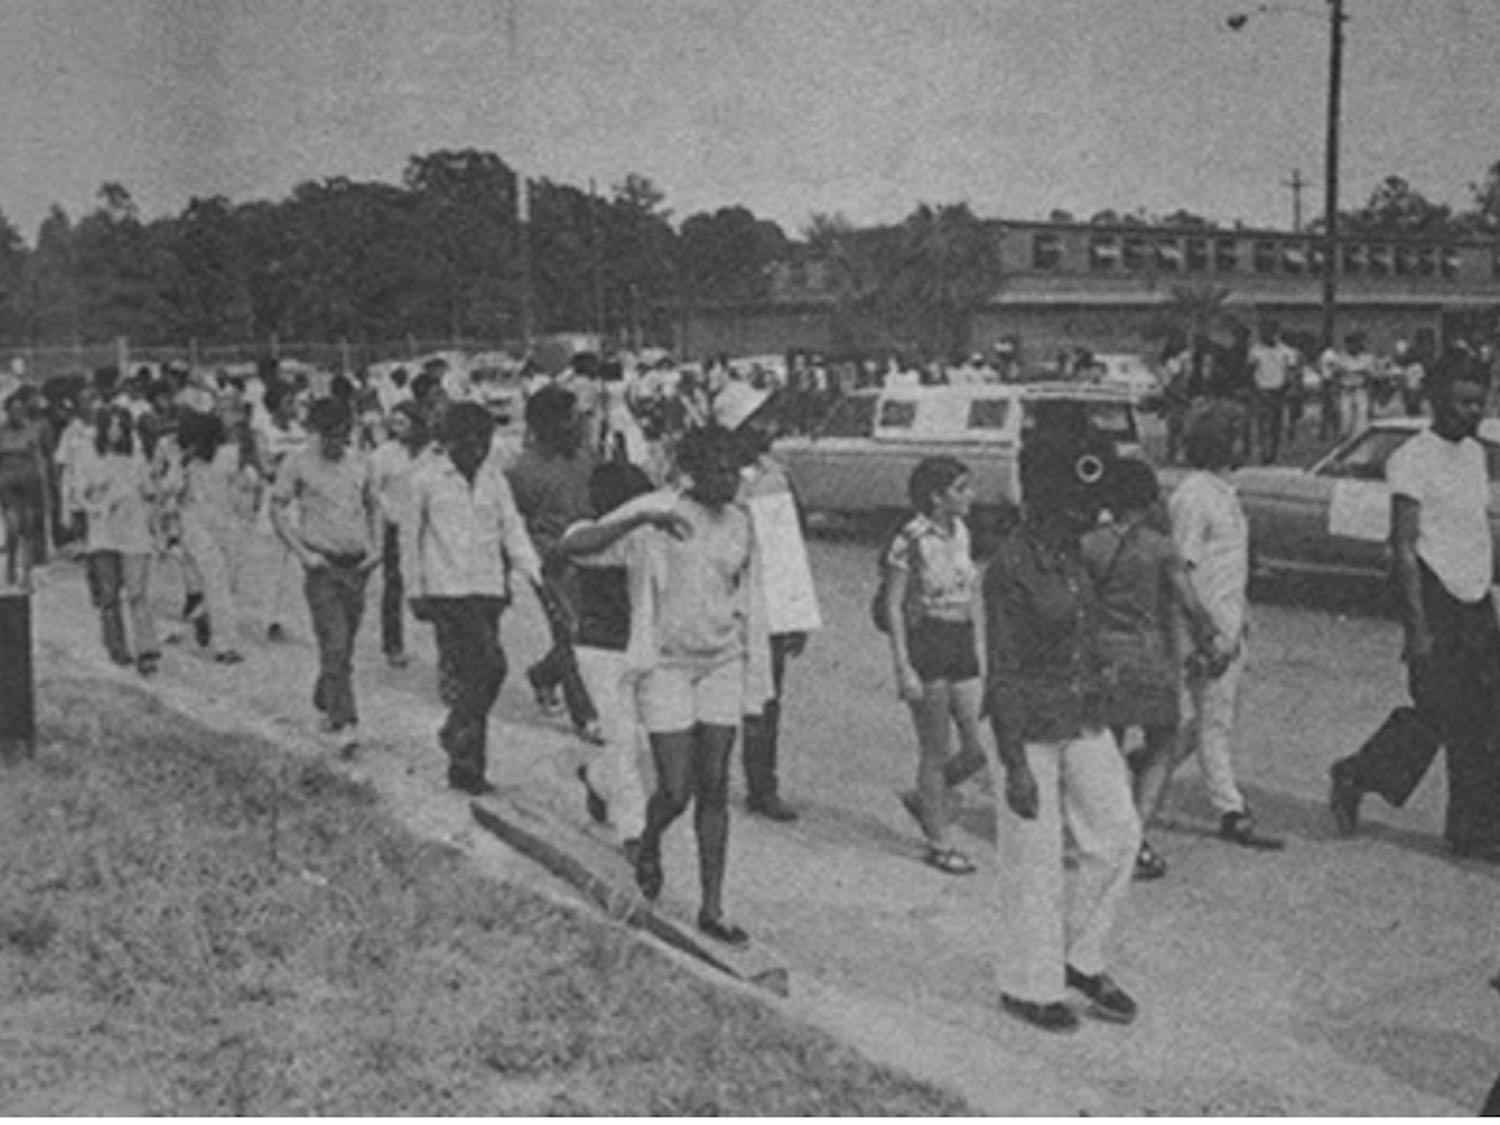 BSU supporters leave Alachua County Jail after a demonstration to free David Horne. Originally published in The Independent Florida Alligator on Tuesday, April 20, 1971. 
